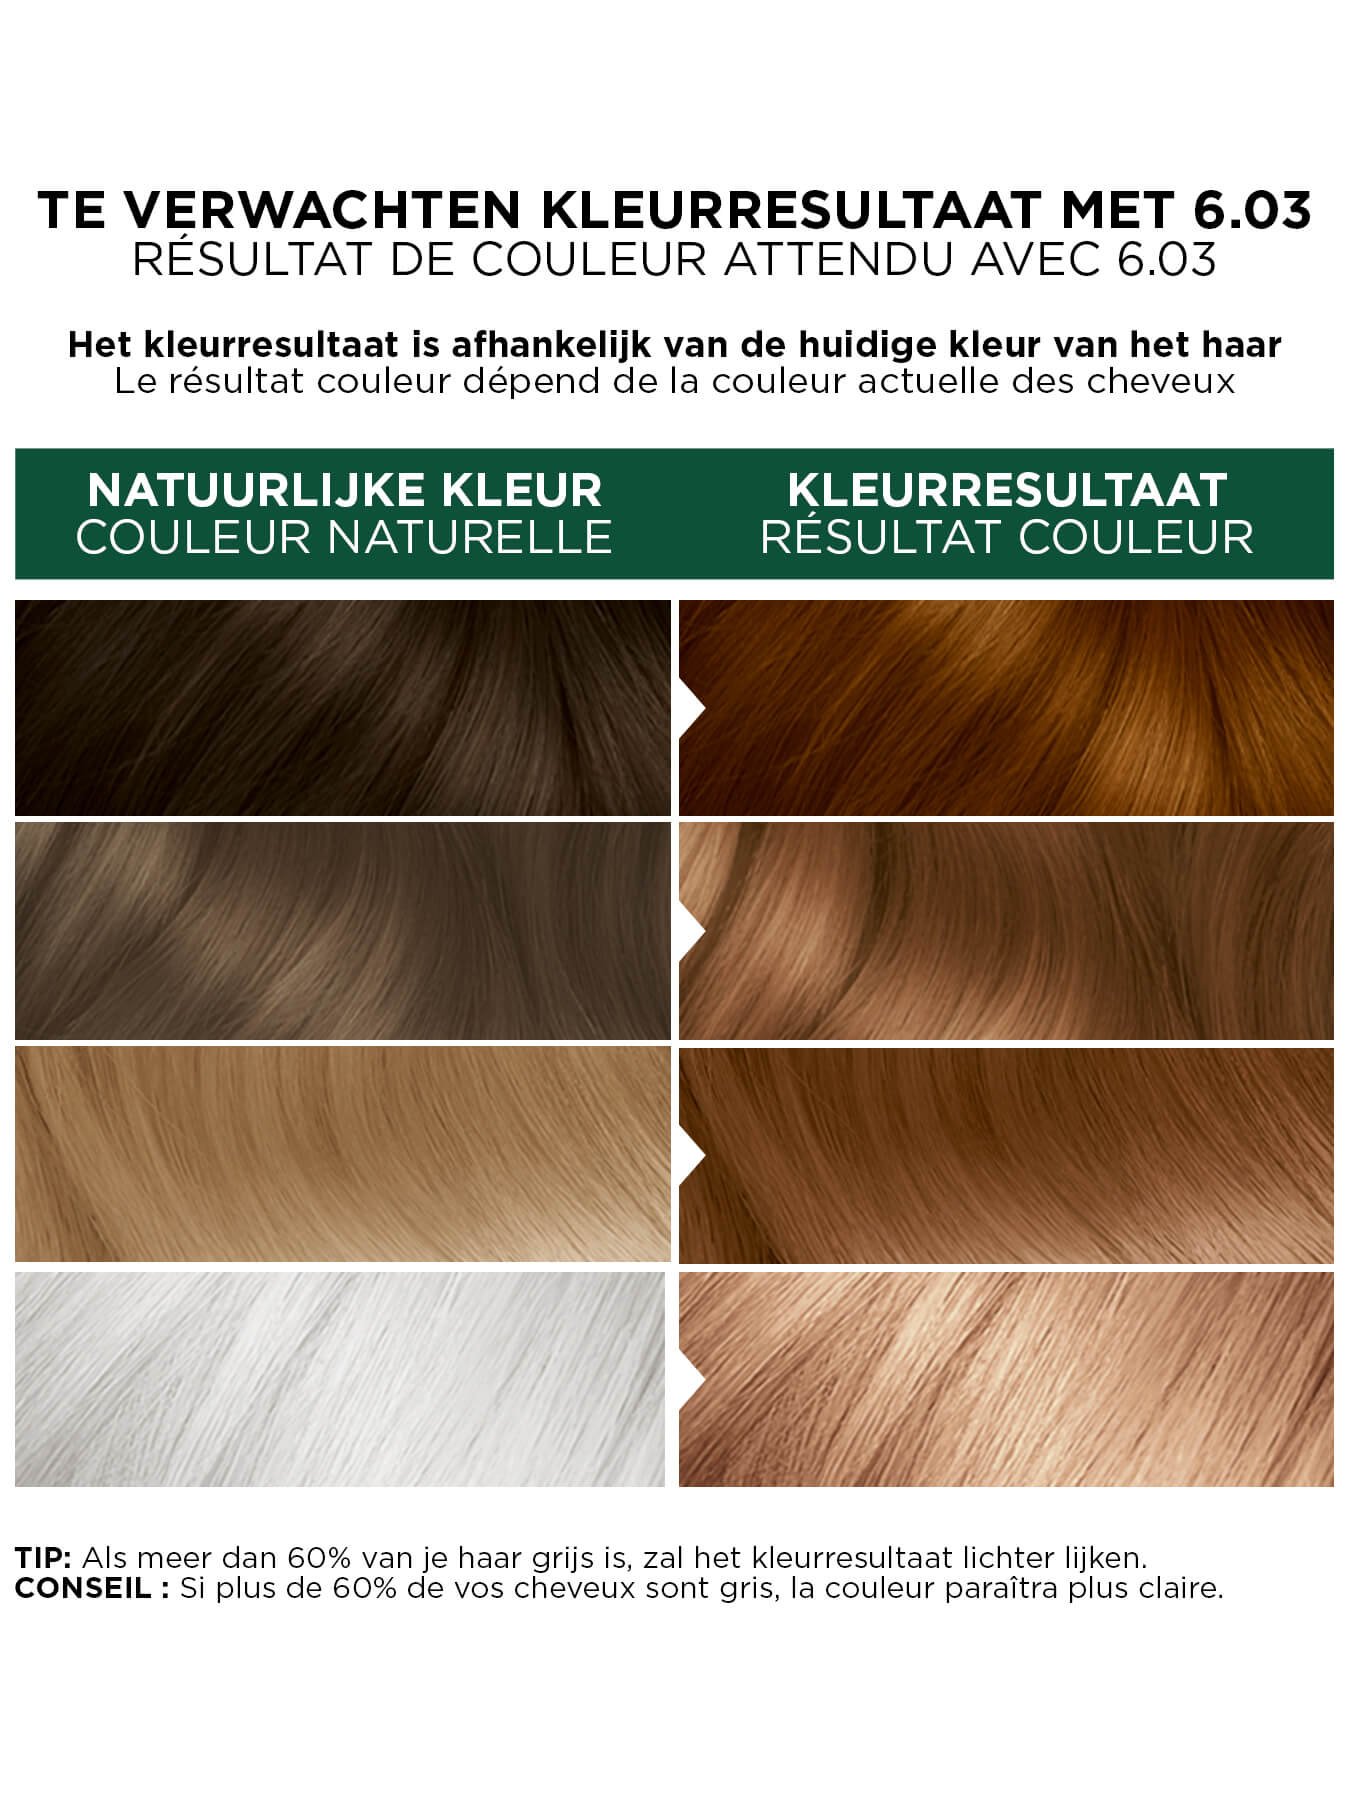 8127170 Belle Color Naturals Resizing 6 03 BE 1350x1800pxjpg master